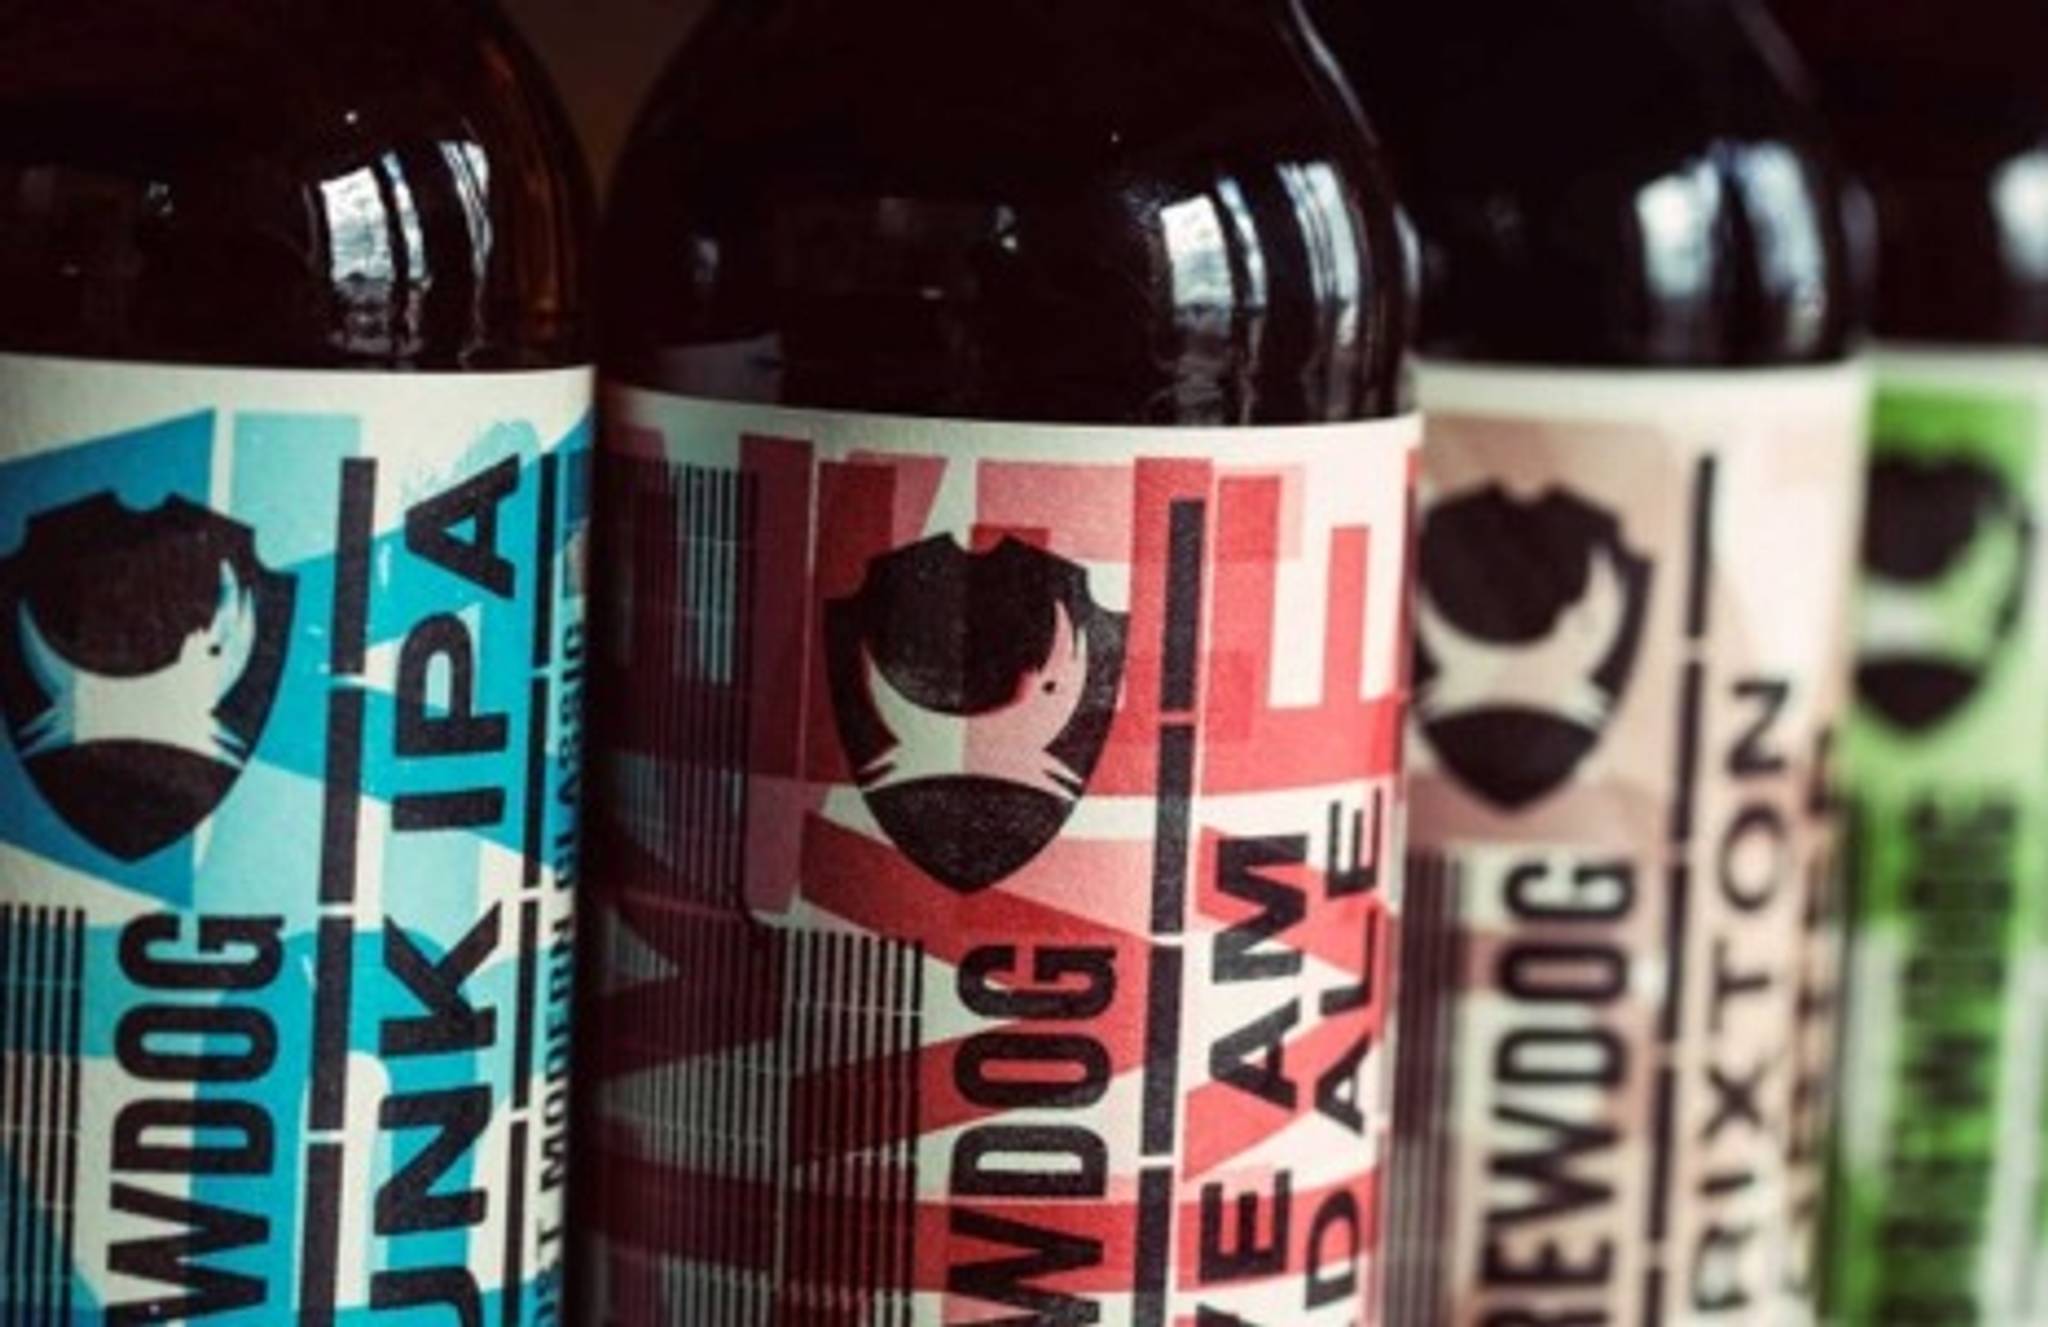 When craft brewers become mainstream